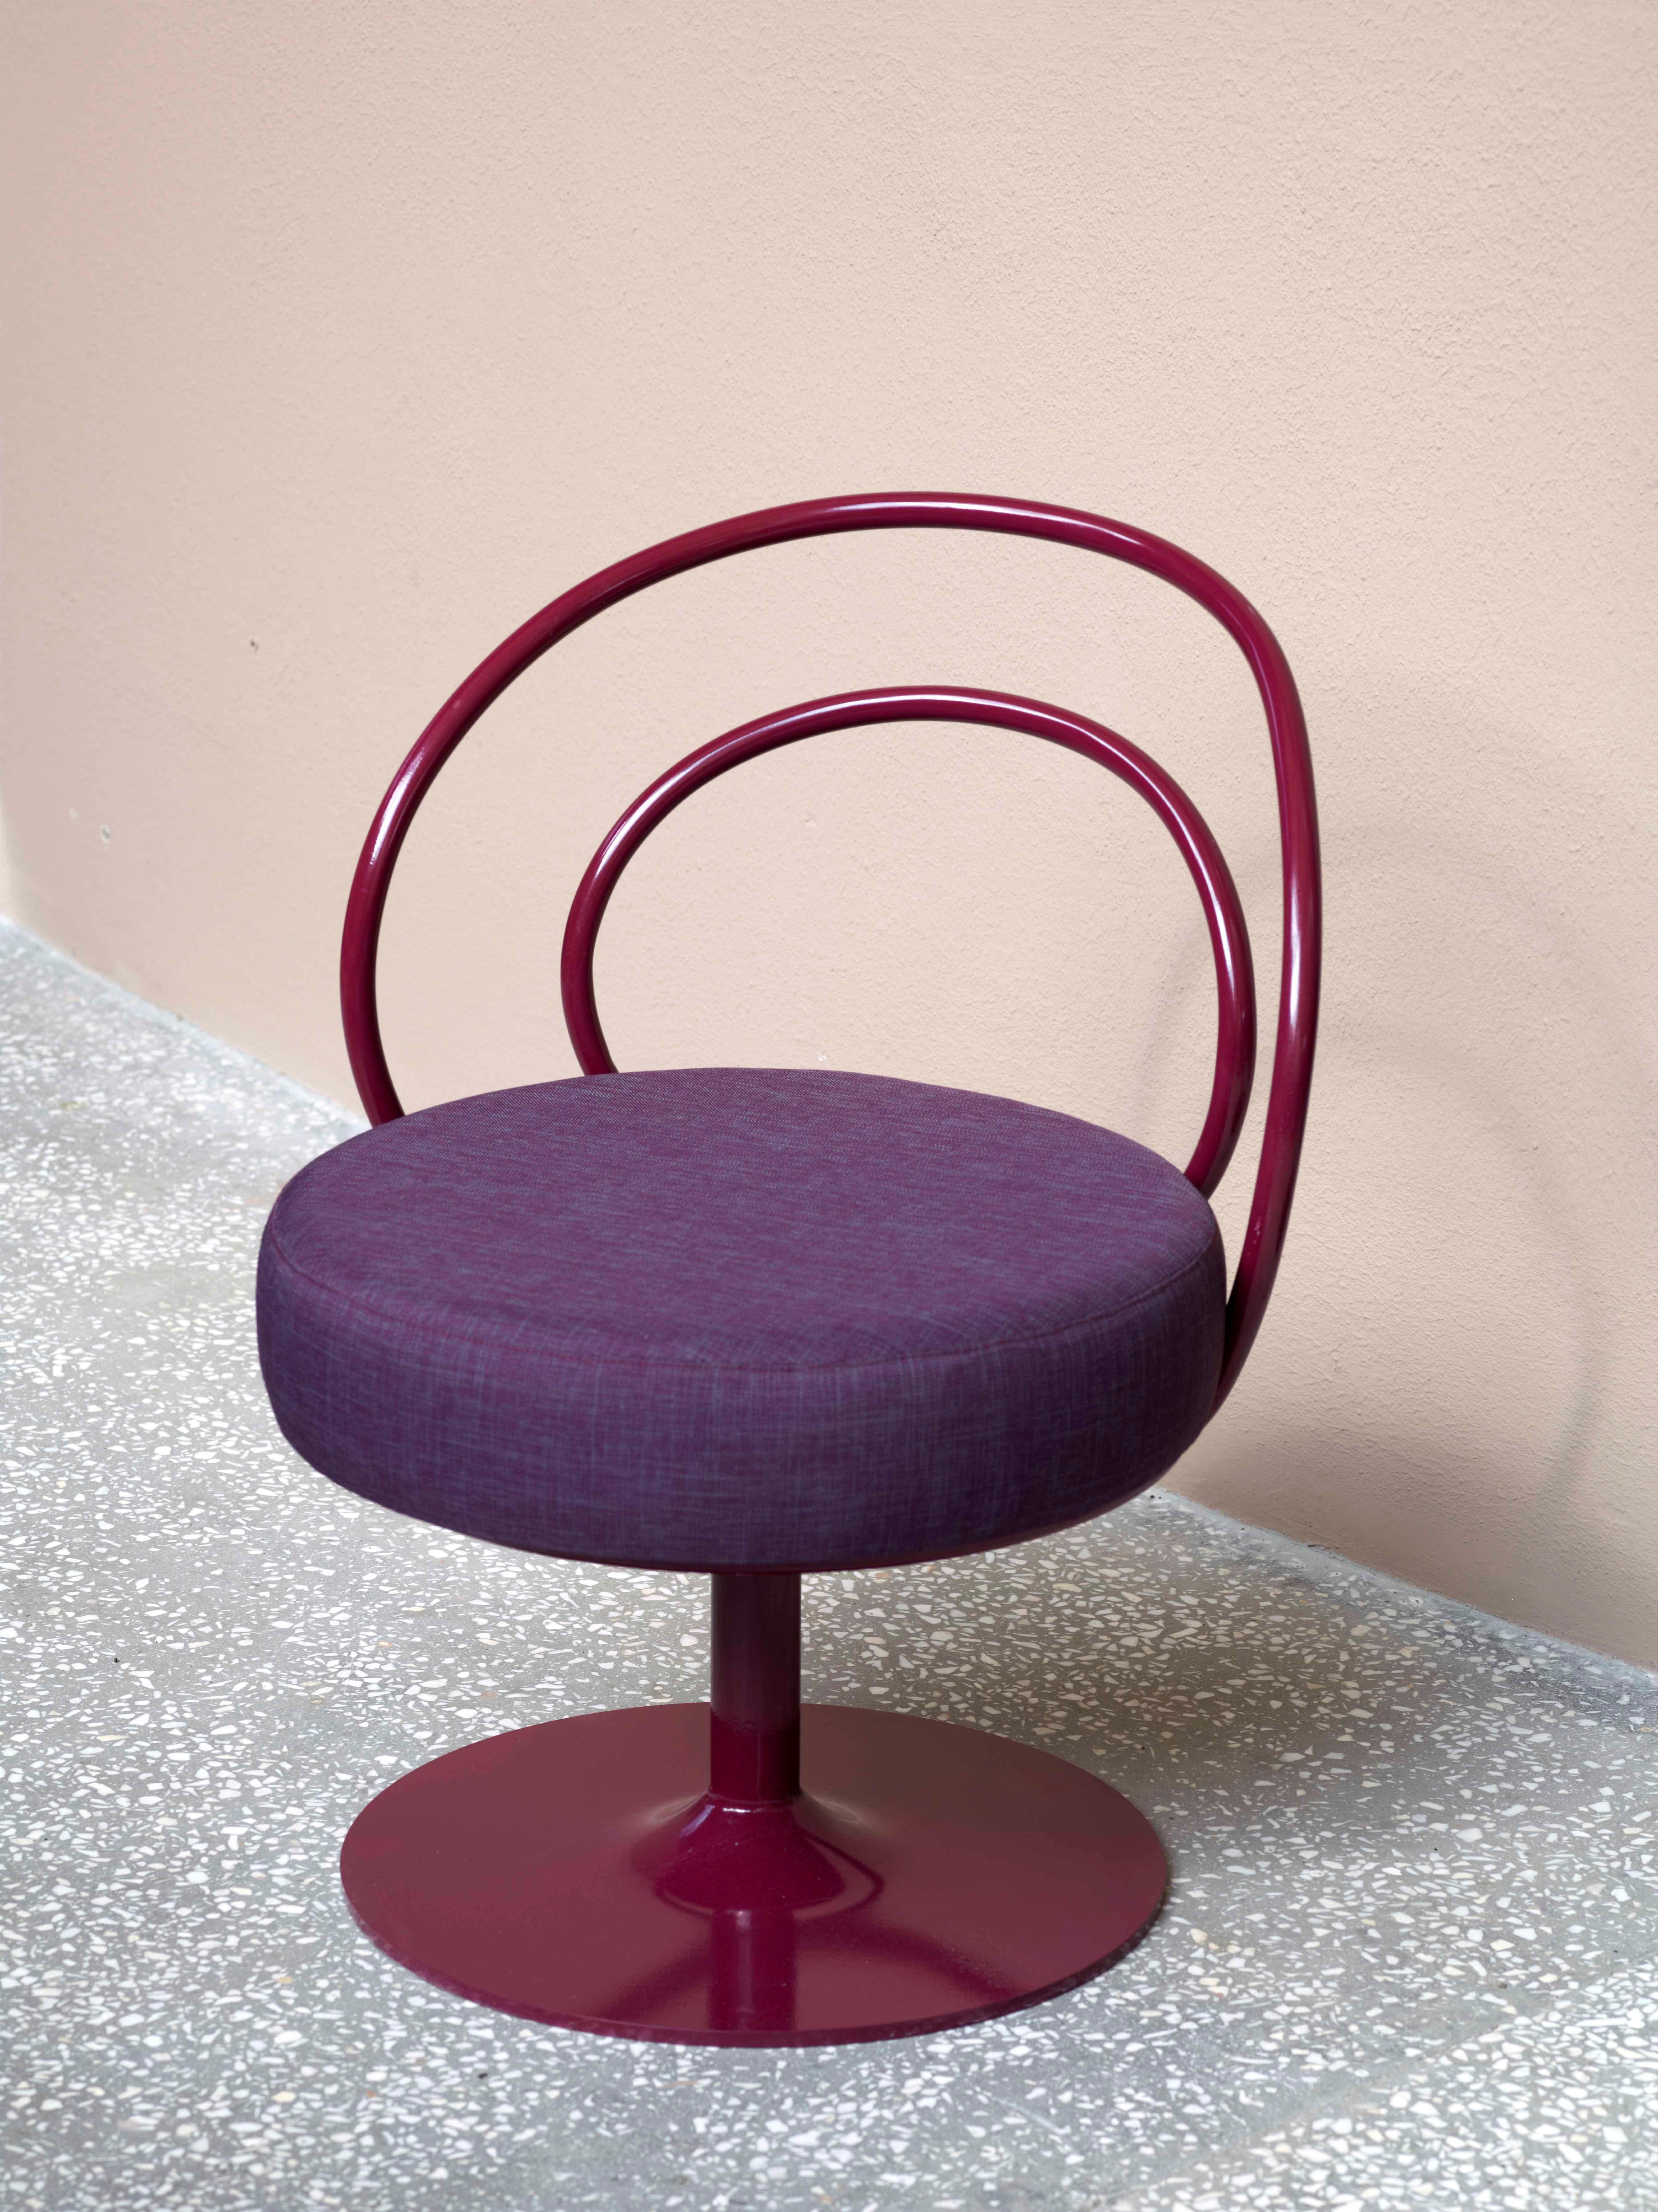 Purple O chair by Sema Topaloglu
Dimensions: 38 x 48 x 74 cm
Materials: Iron and cushion

Sema Topaloglu is known for her dedication to materials, craftsmanship and a unique aesthetic vision. The tactile and visual relations between materials,